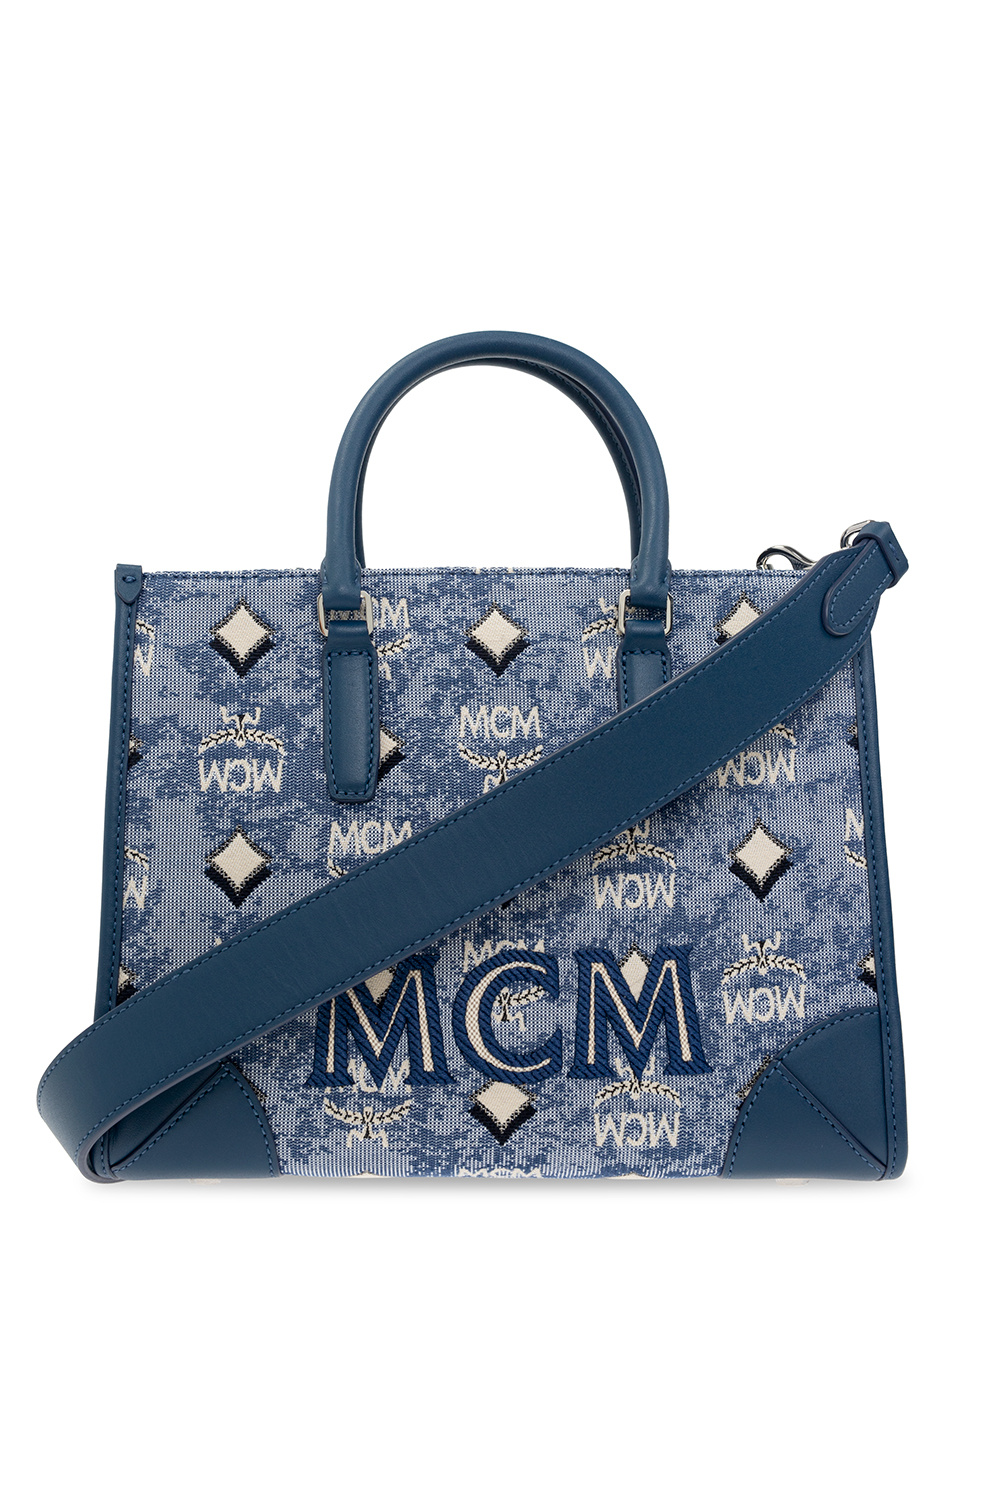 MCM, Bags, Mcm Black Chain Strap Shoulder Bag With Removable Strap For  Clutch Use